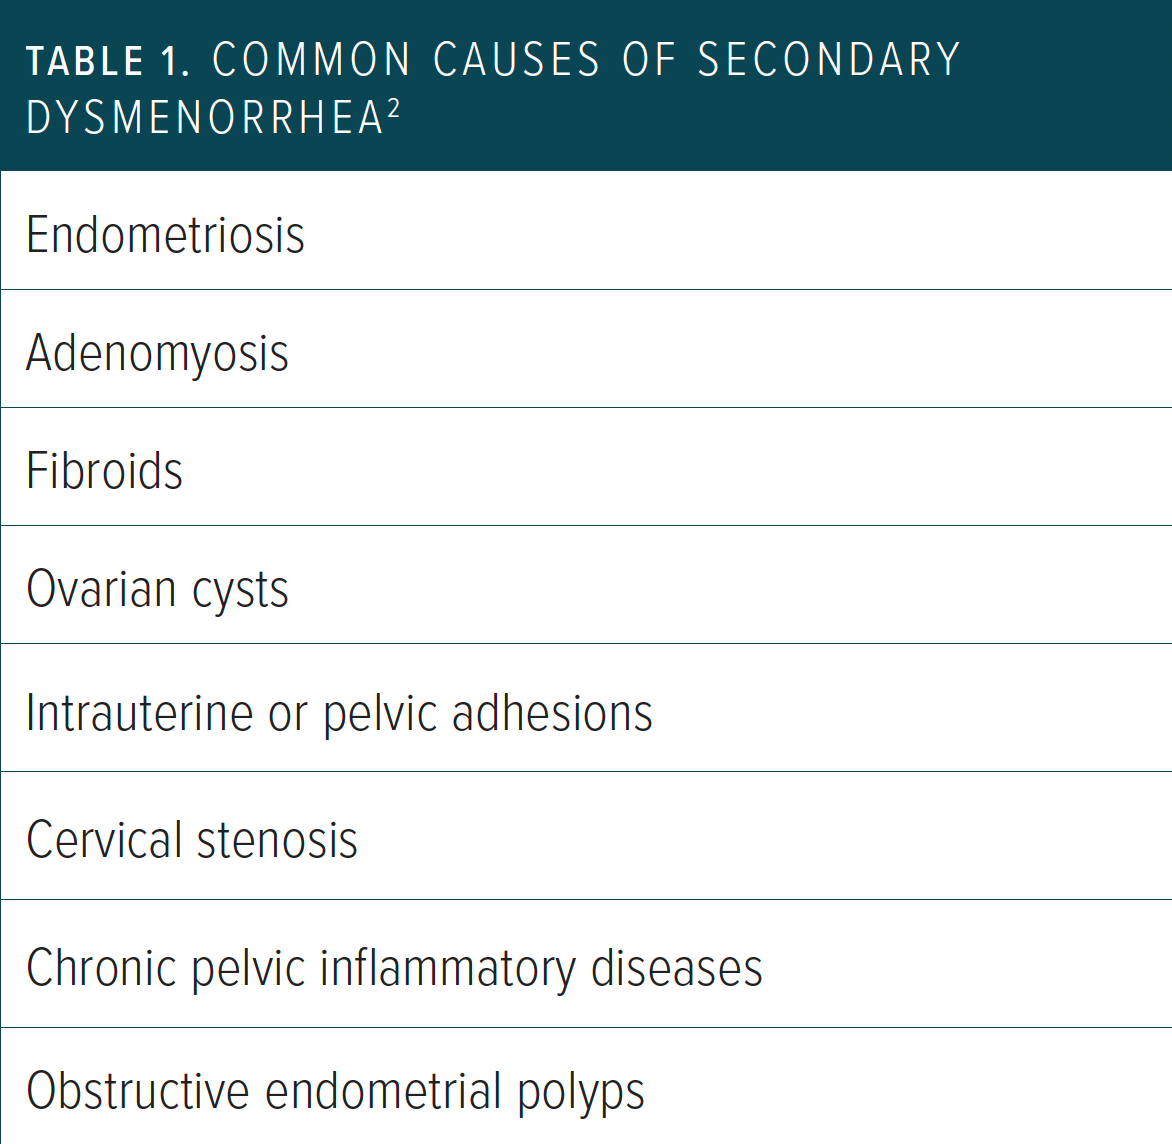 Table 1: Common Causes of Secondary Dysmenorrhea